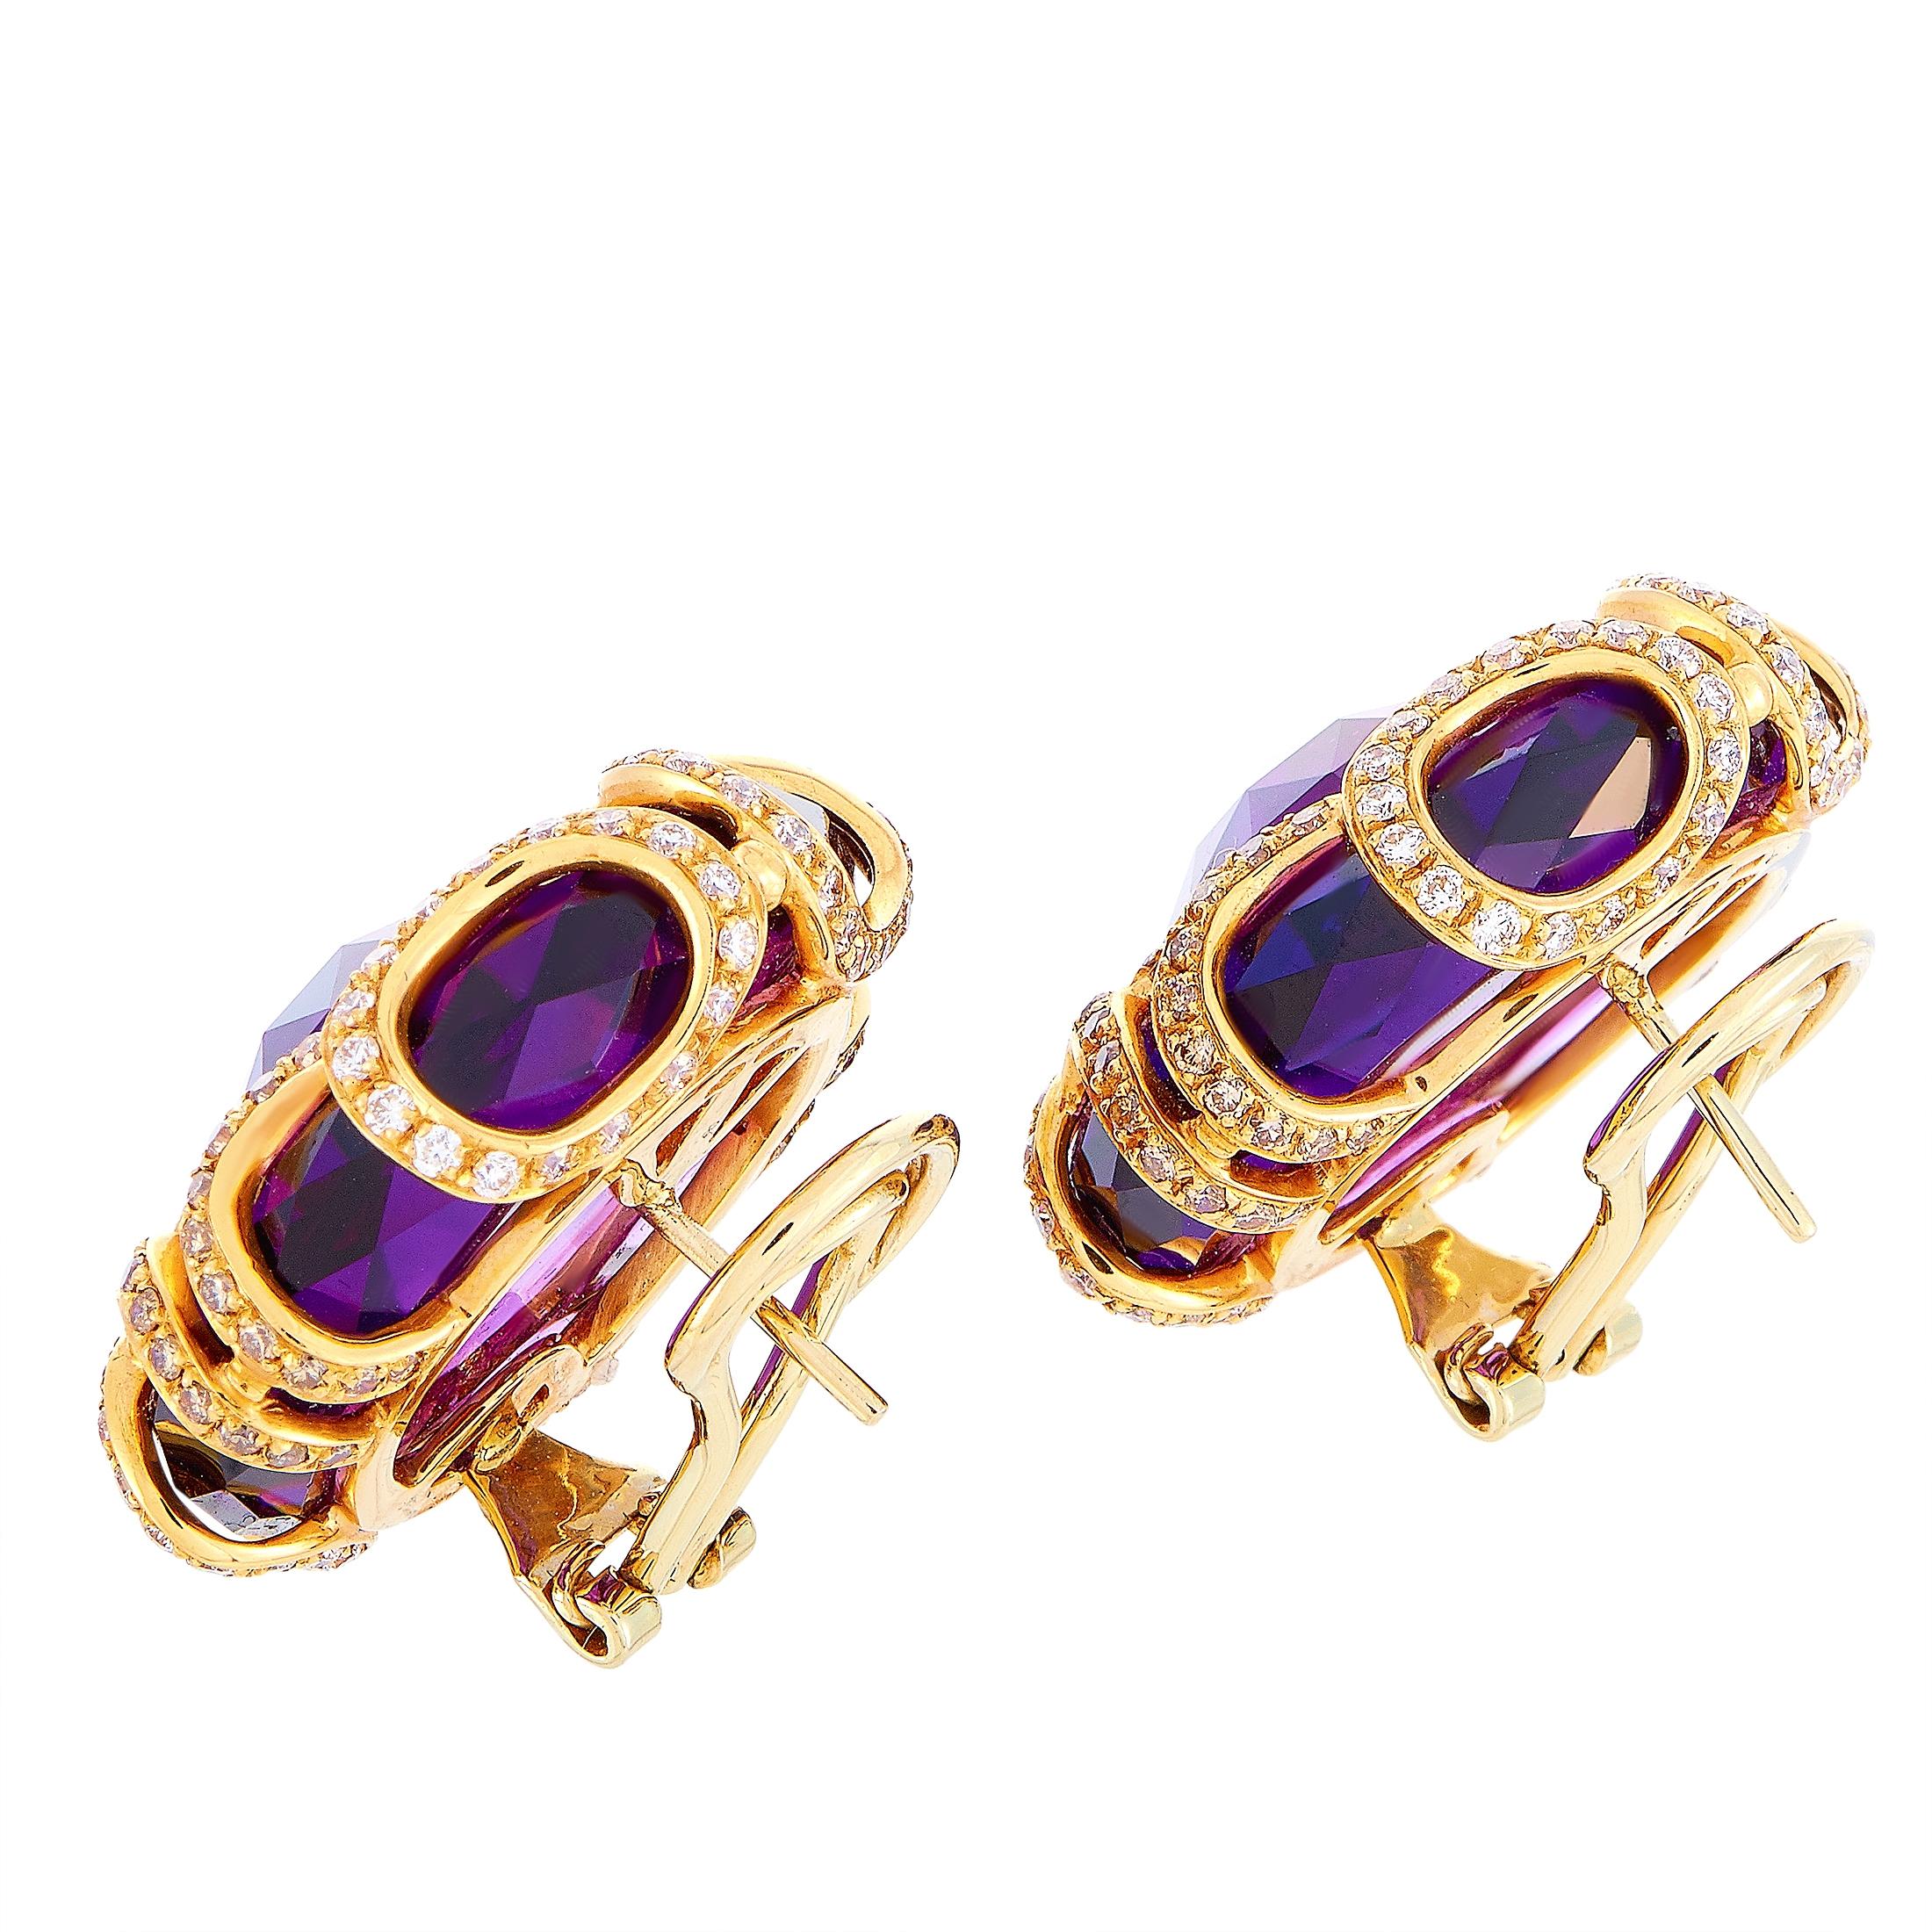 These Oro Trend earrings are crafted from 18K rose gold and each of the two weighs 19.8 grams, measuring 1.25” in length and 1.25” in width. The earrings are embellished with amethysts and with white and brown diamonds that total 1.13 and 1.32